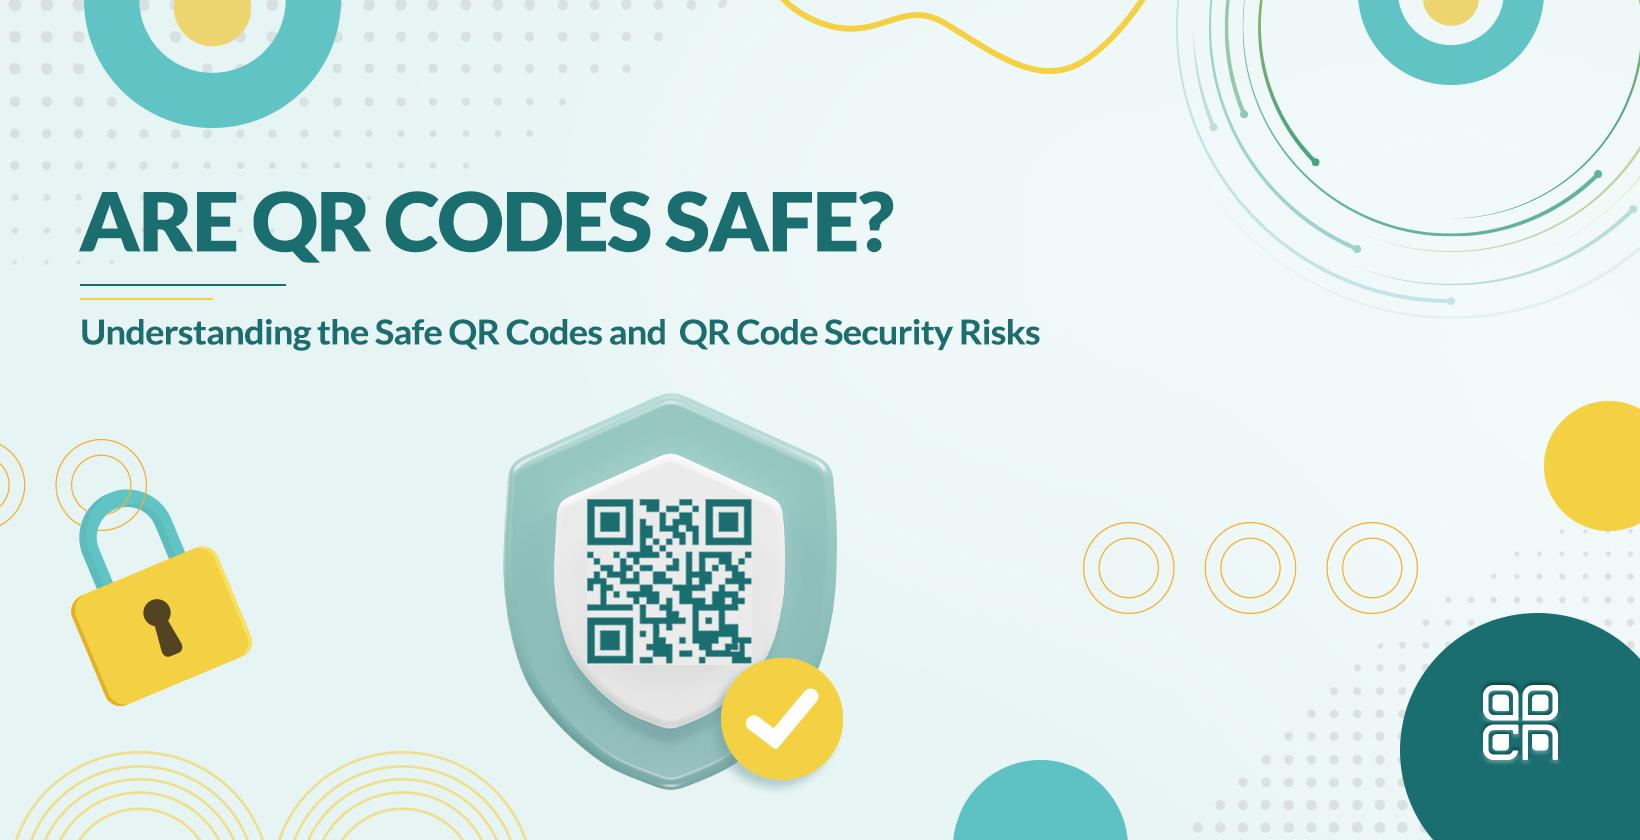 Are QR Codes Safe? What are the Risks? How to Use It Securely?